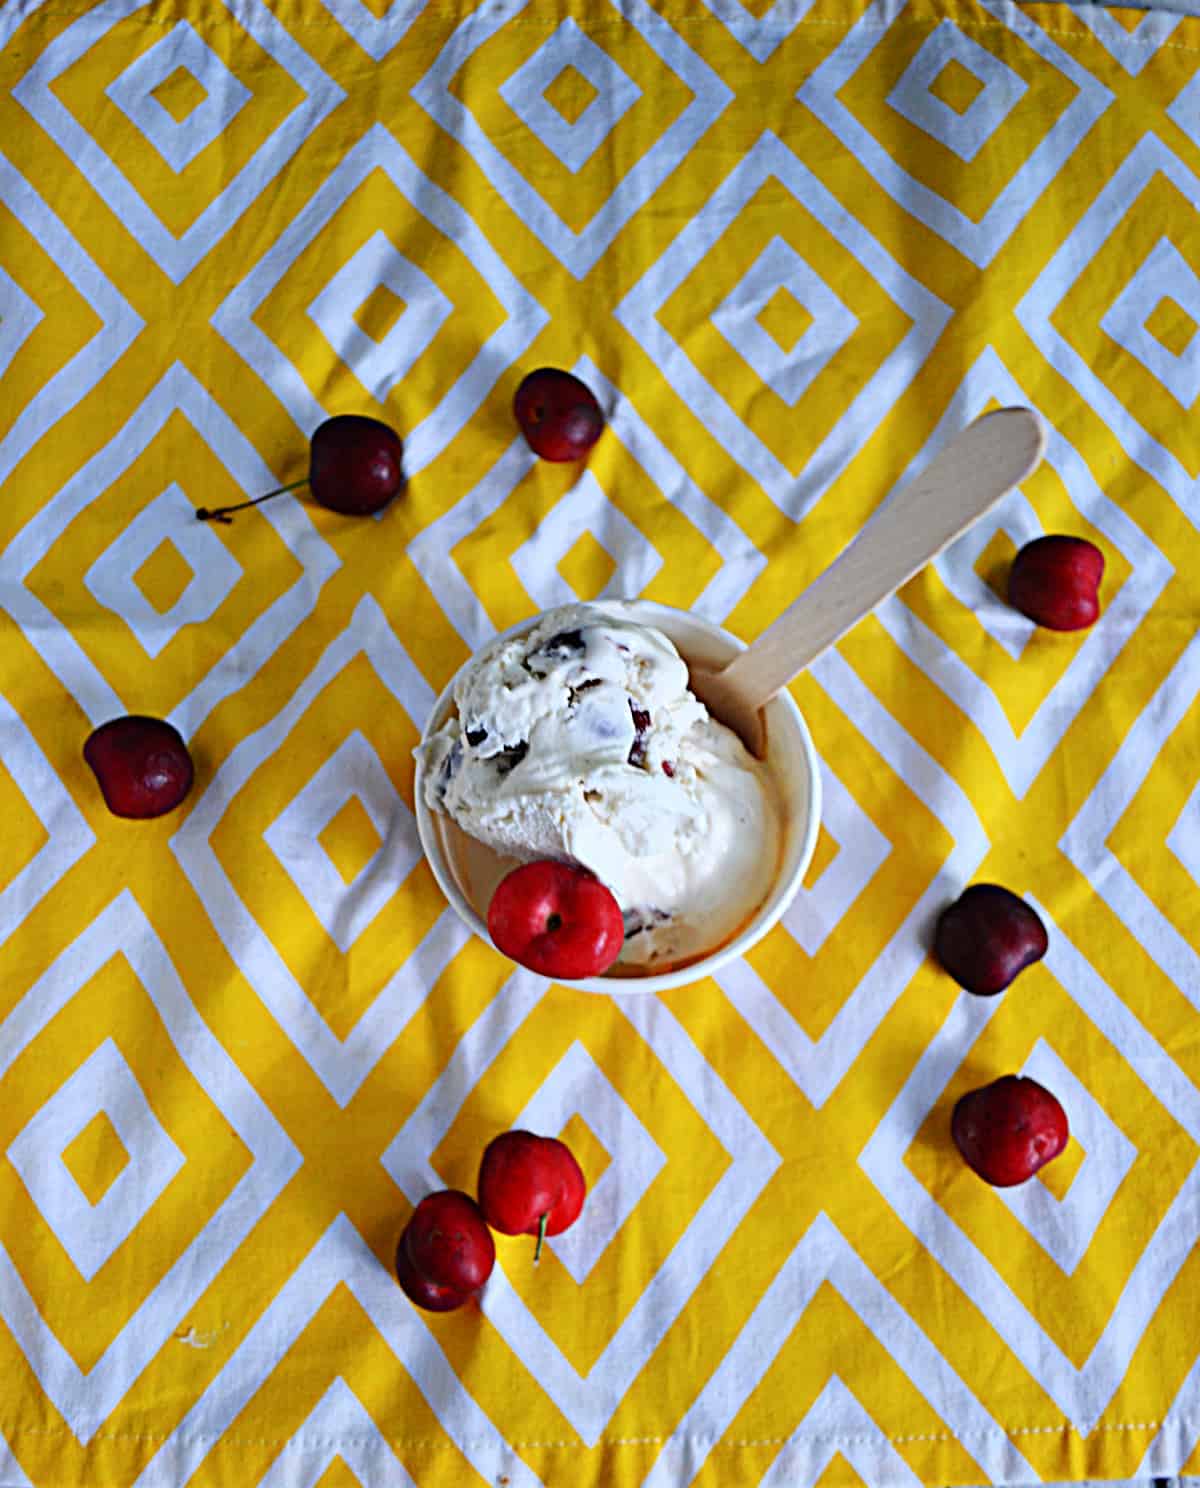 A top view of a cup of cherry vanilla ice cream with cherries all around.